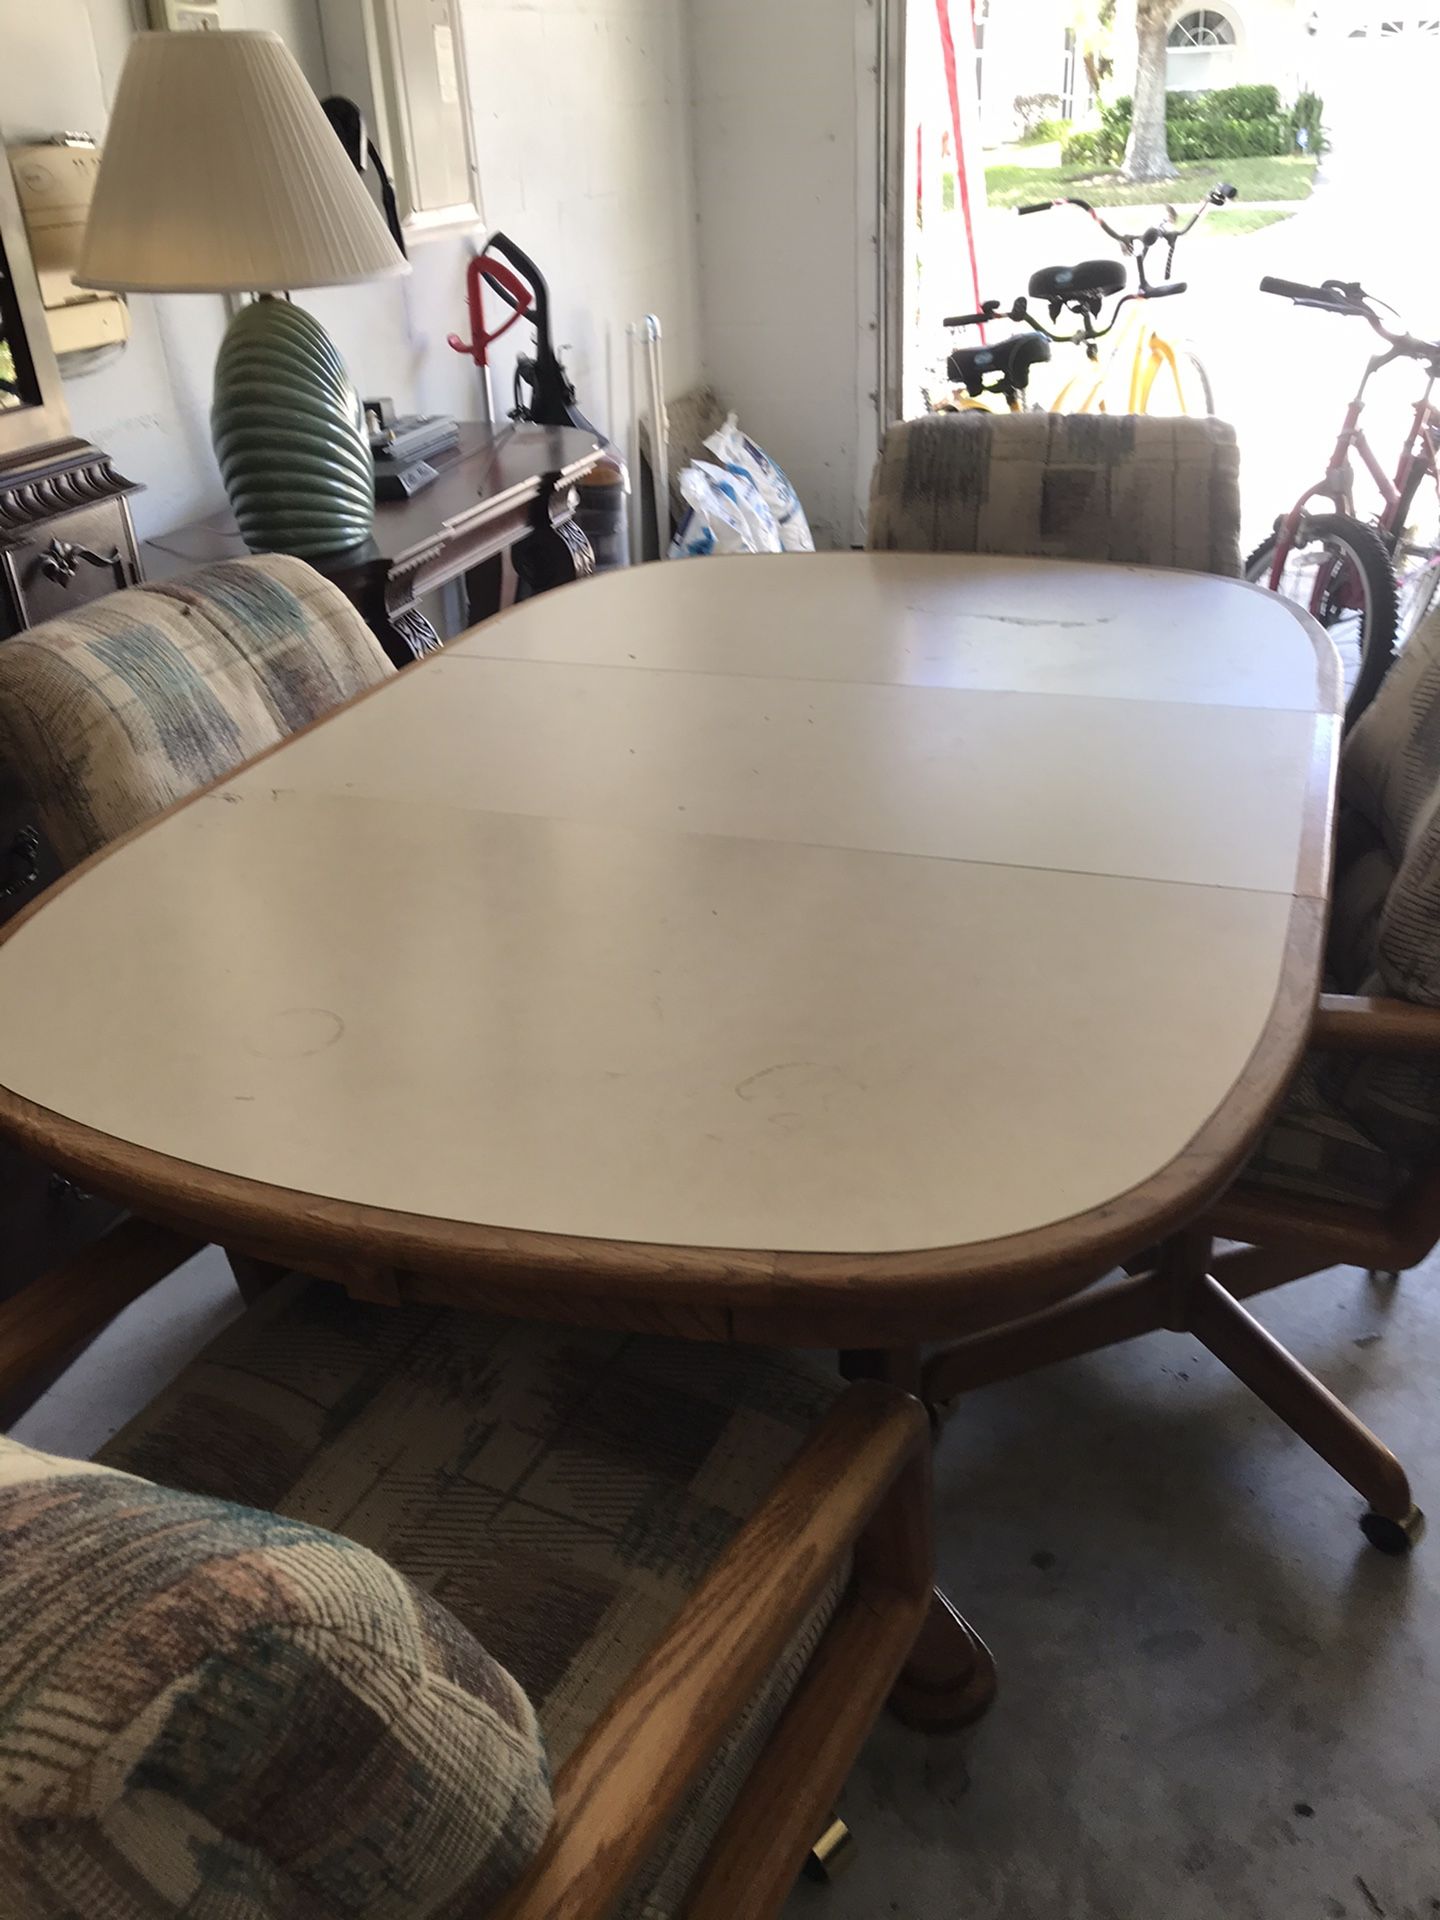 4 chairs with castor wheels and expandable table 65” in length by 42” wide